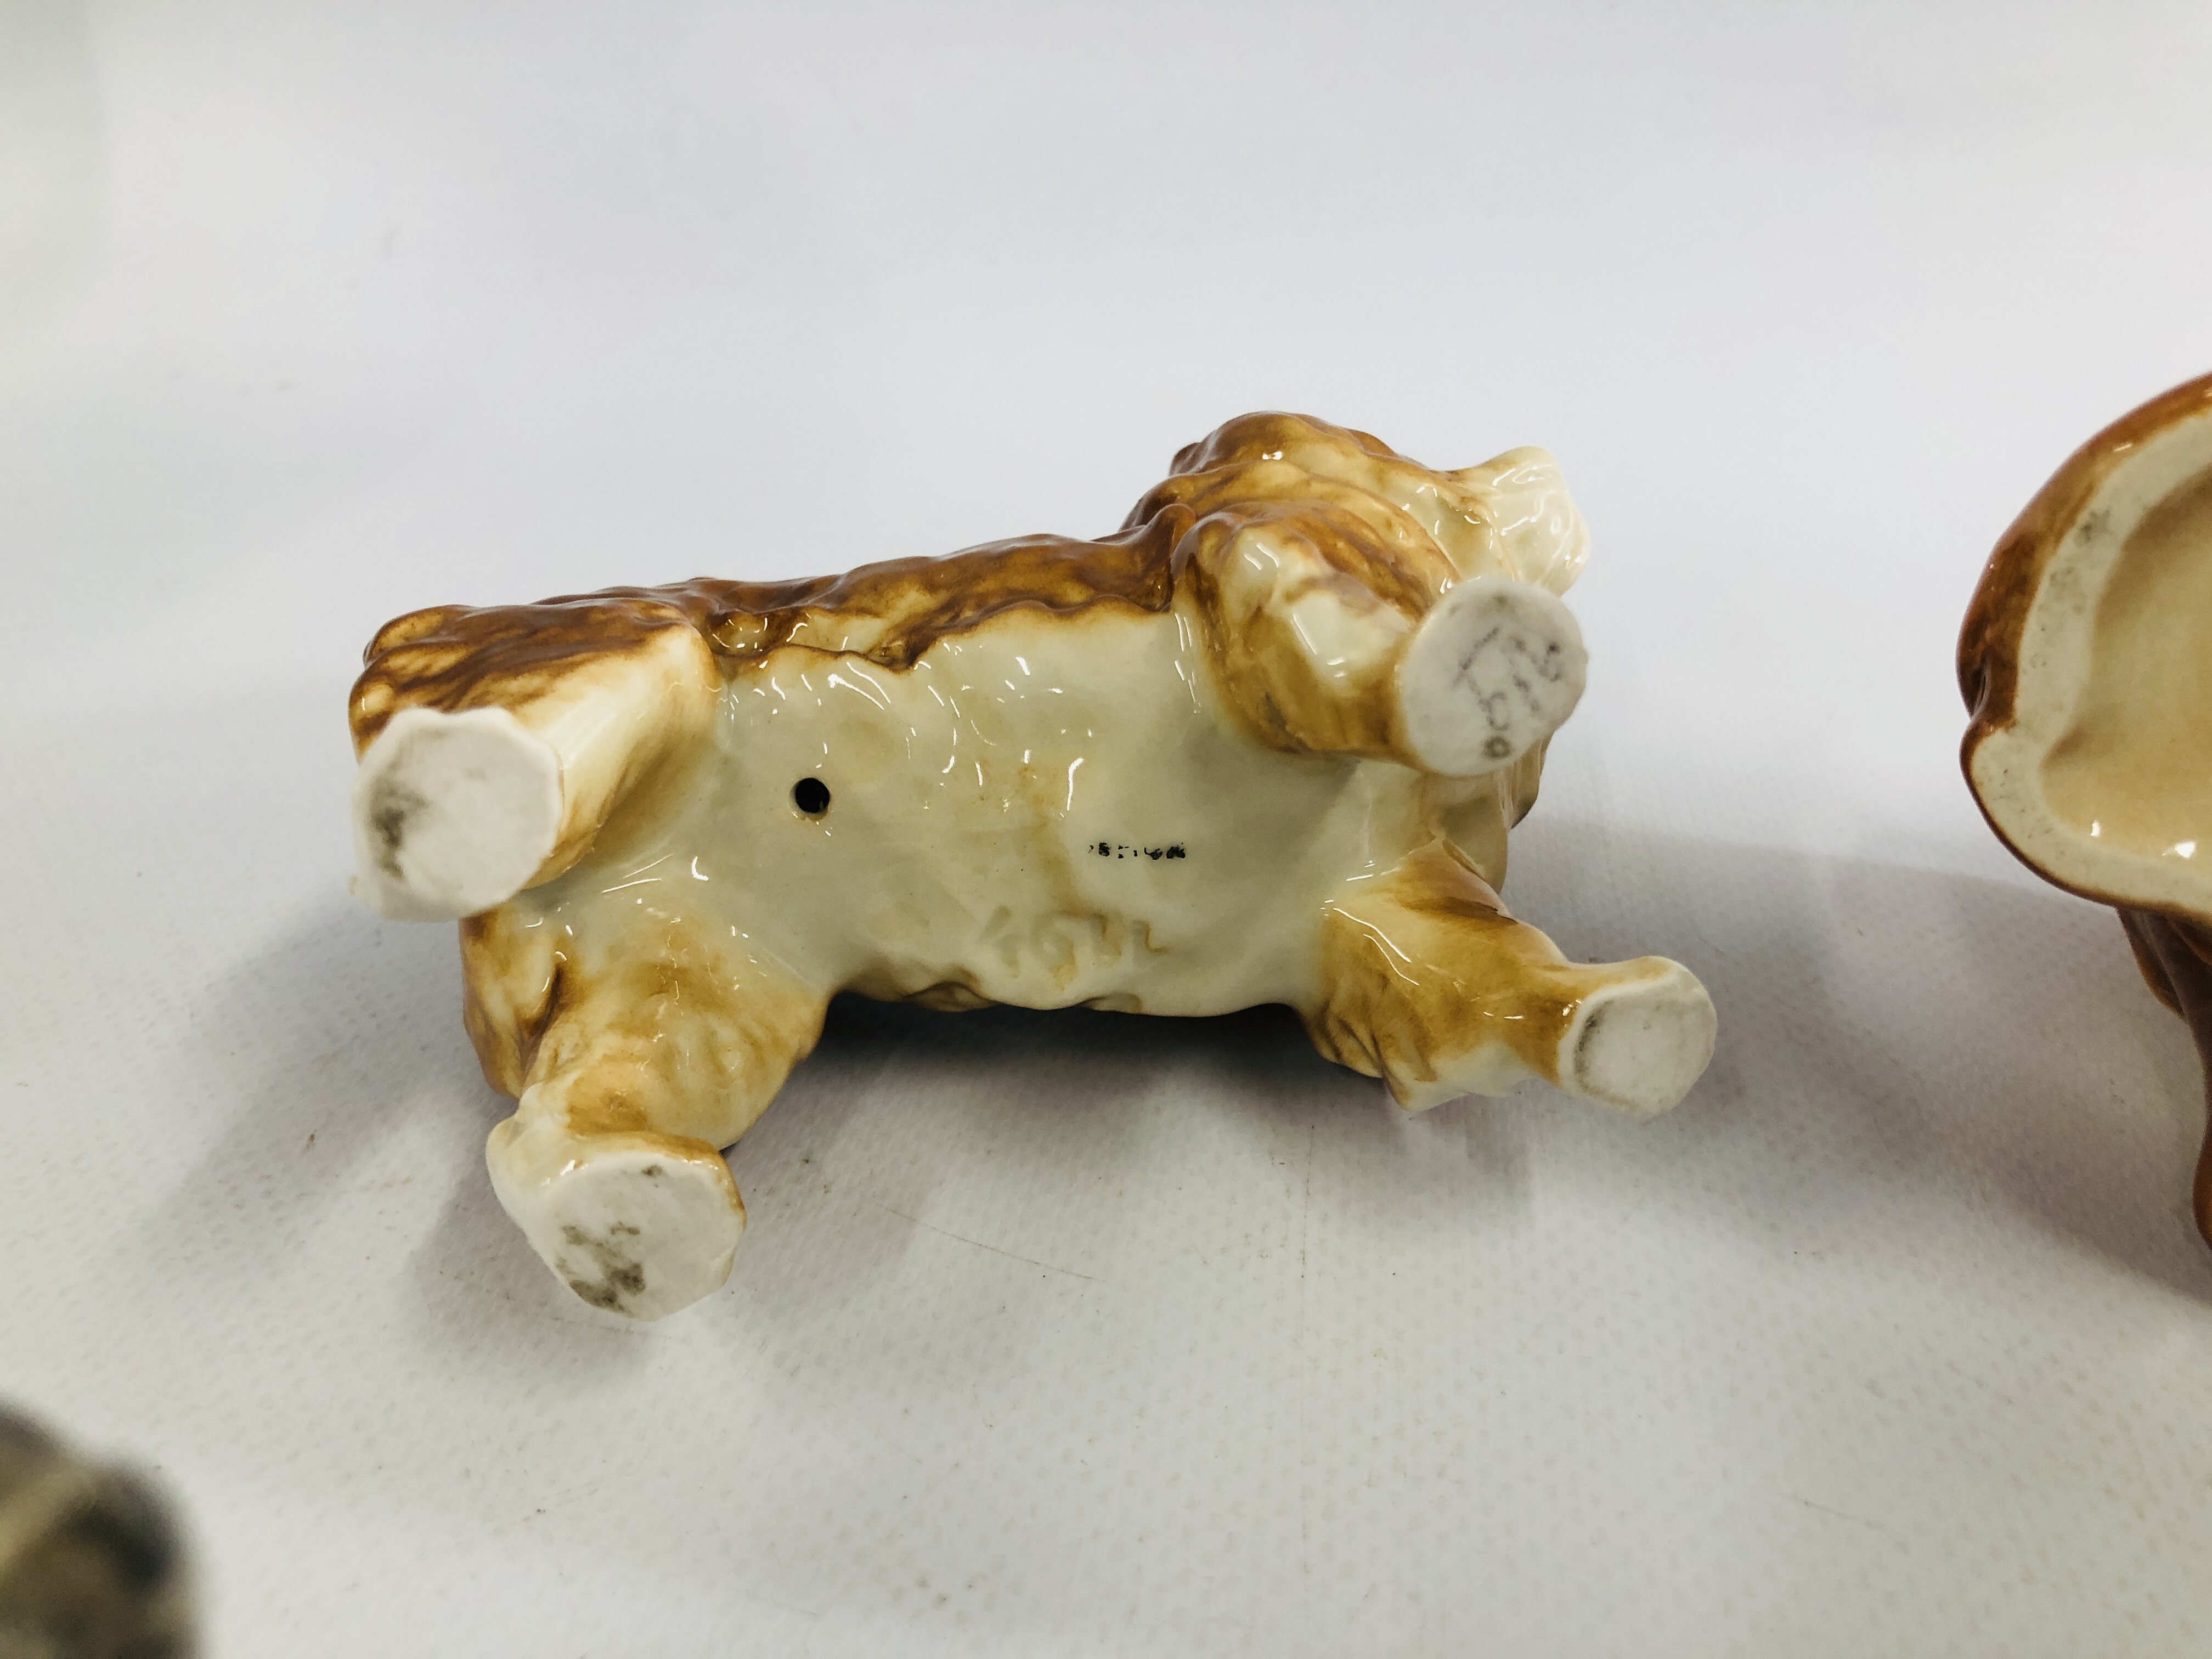 FOUR BESWICK "BANDSMEN" CATS AND BESWICK GINGER CAT ORNAMENT AND CHOW-CHOW DOG ORNAMENT - Image 6 of 9